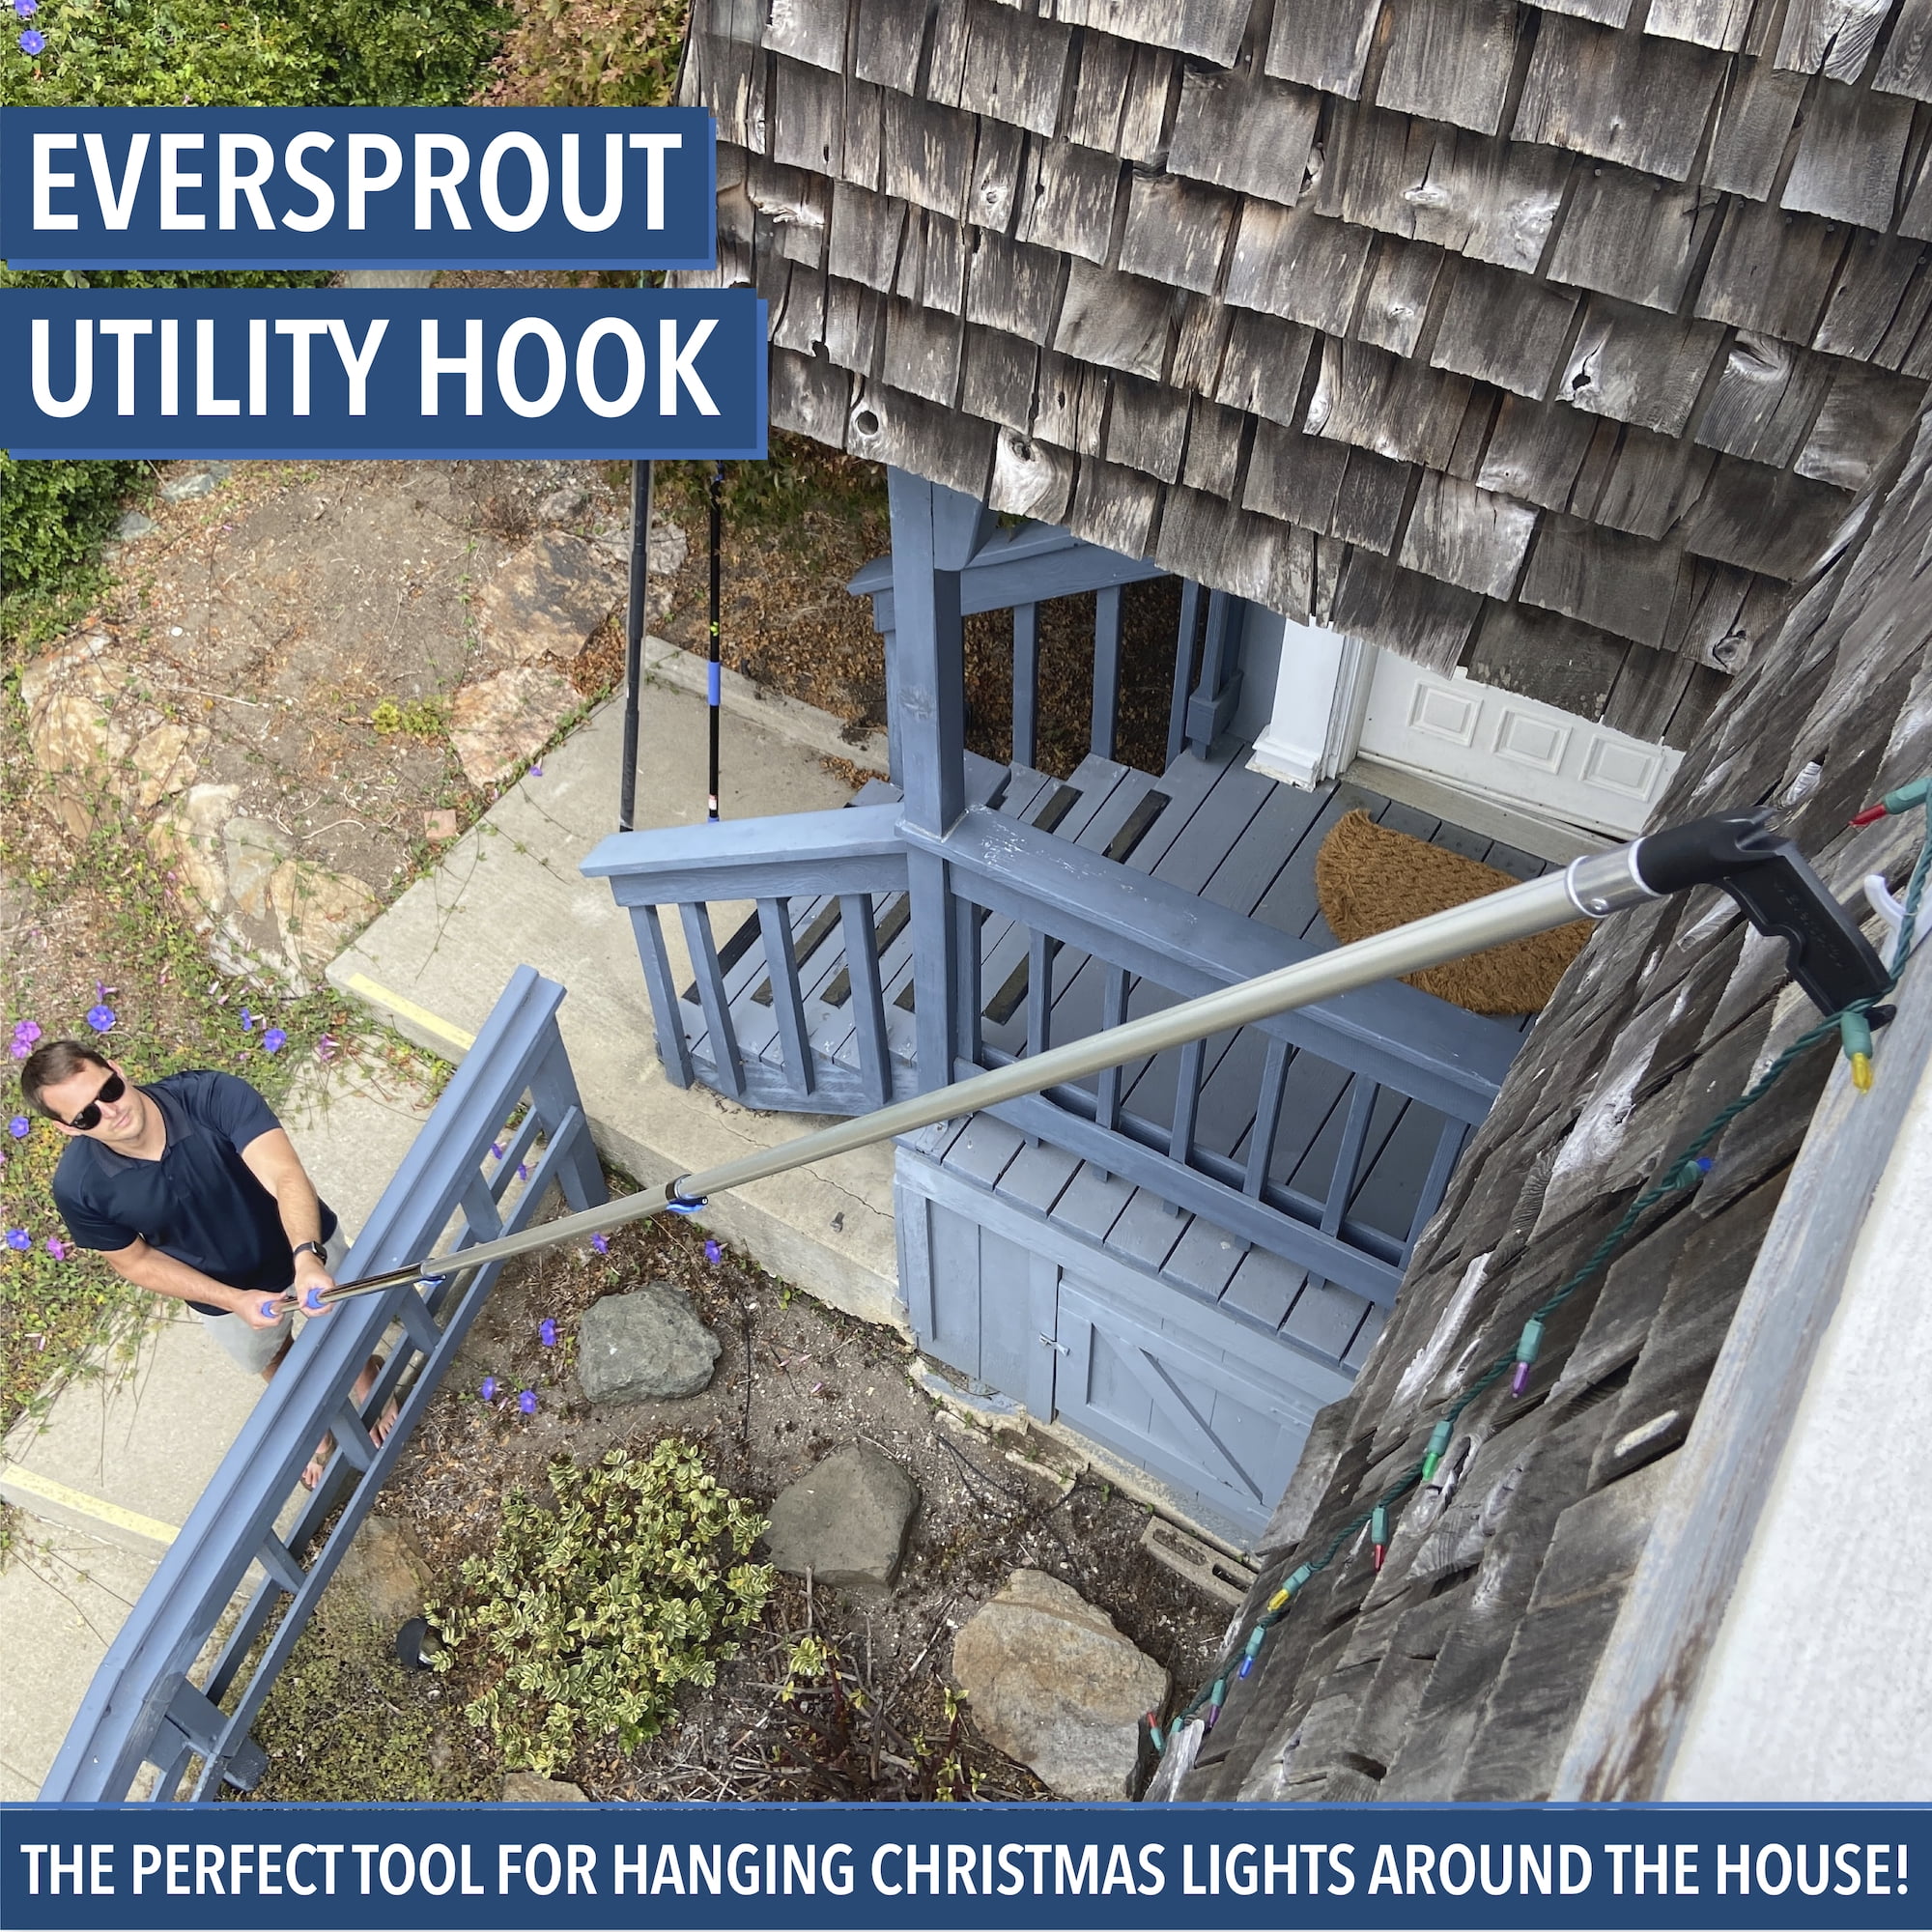 EVERSPROUT 7-to-25 Foot Utility Hook with Extension Pole (30 Foot Reach), Installing and Hanging Christmas/String Lights, Birdfeeders, Reaching High  Places